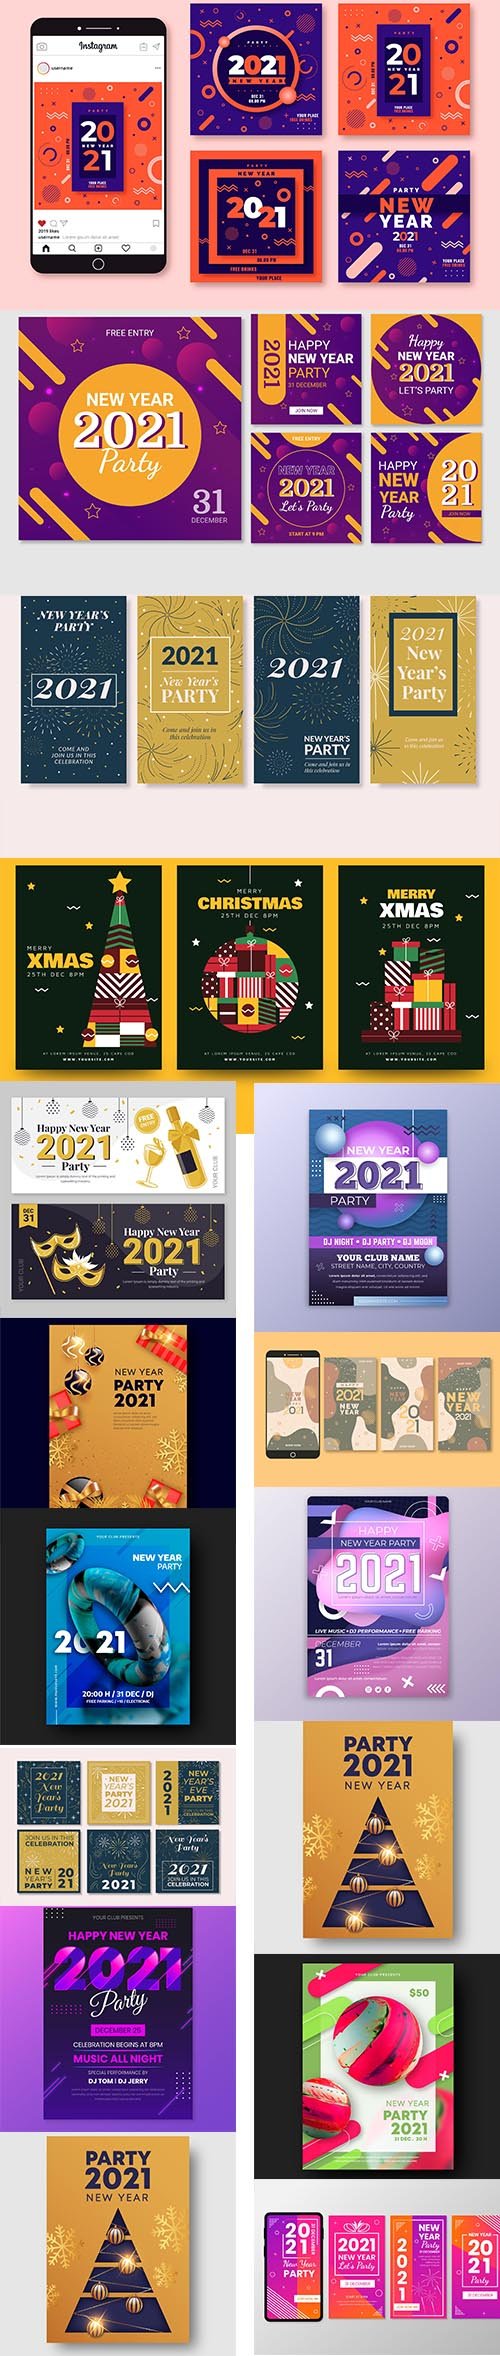 New year 2021 party instagram posts and new year party flyer template